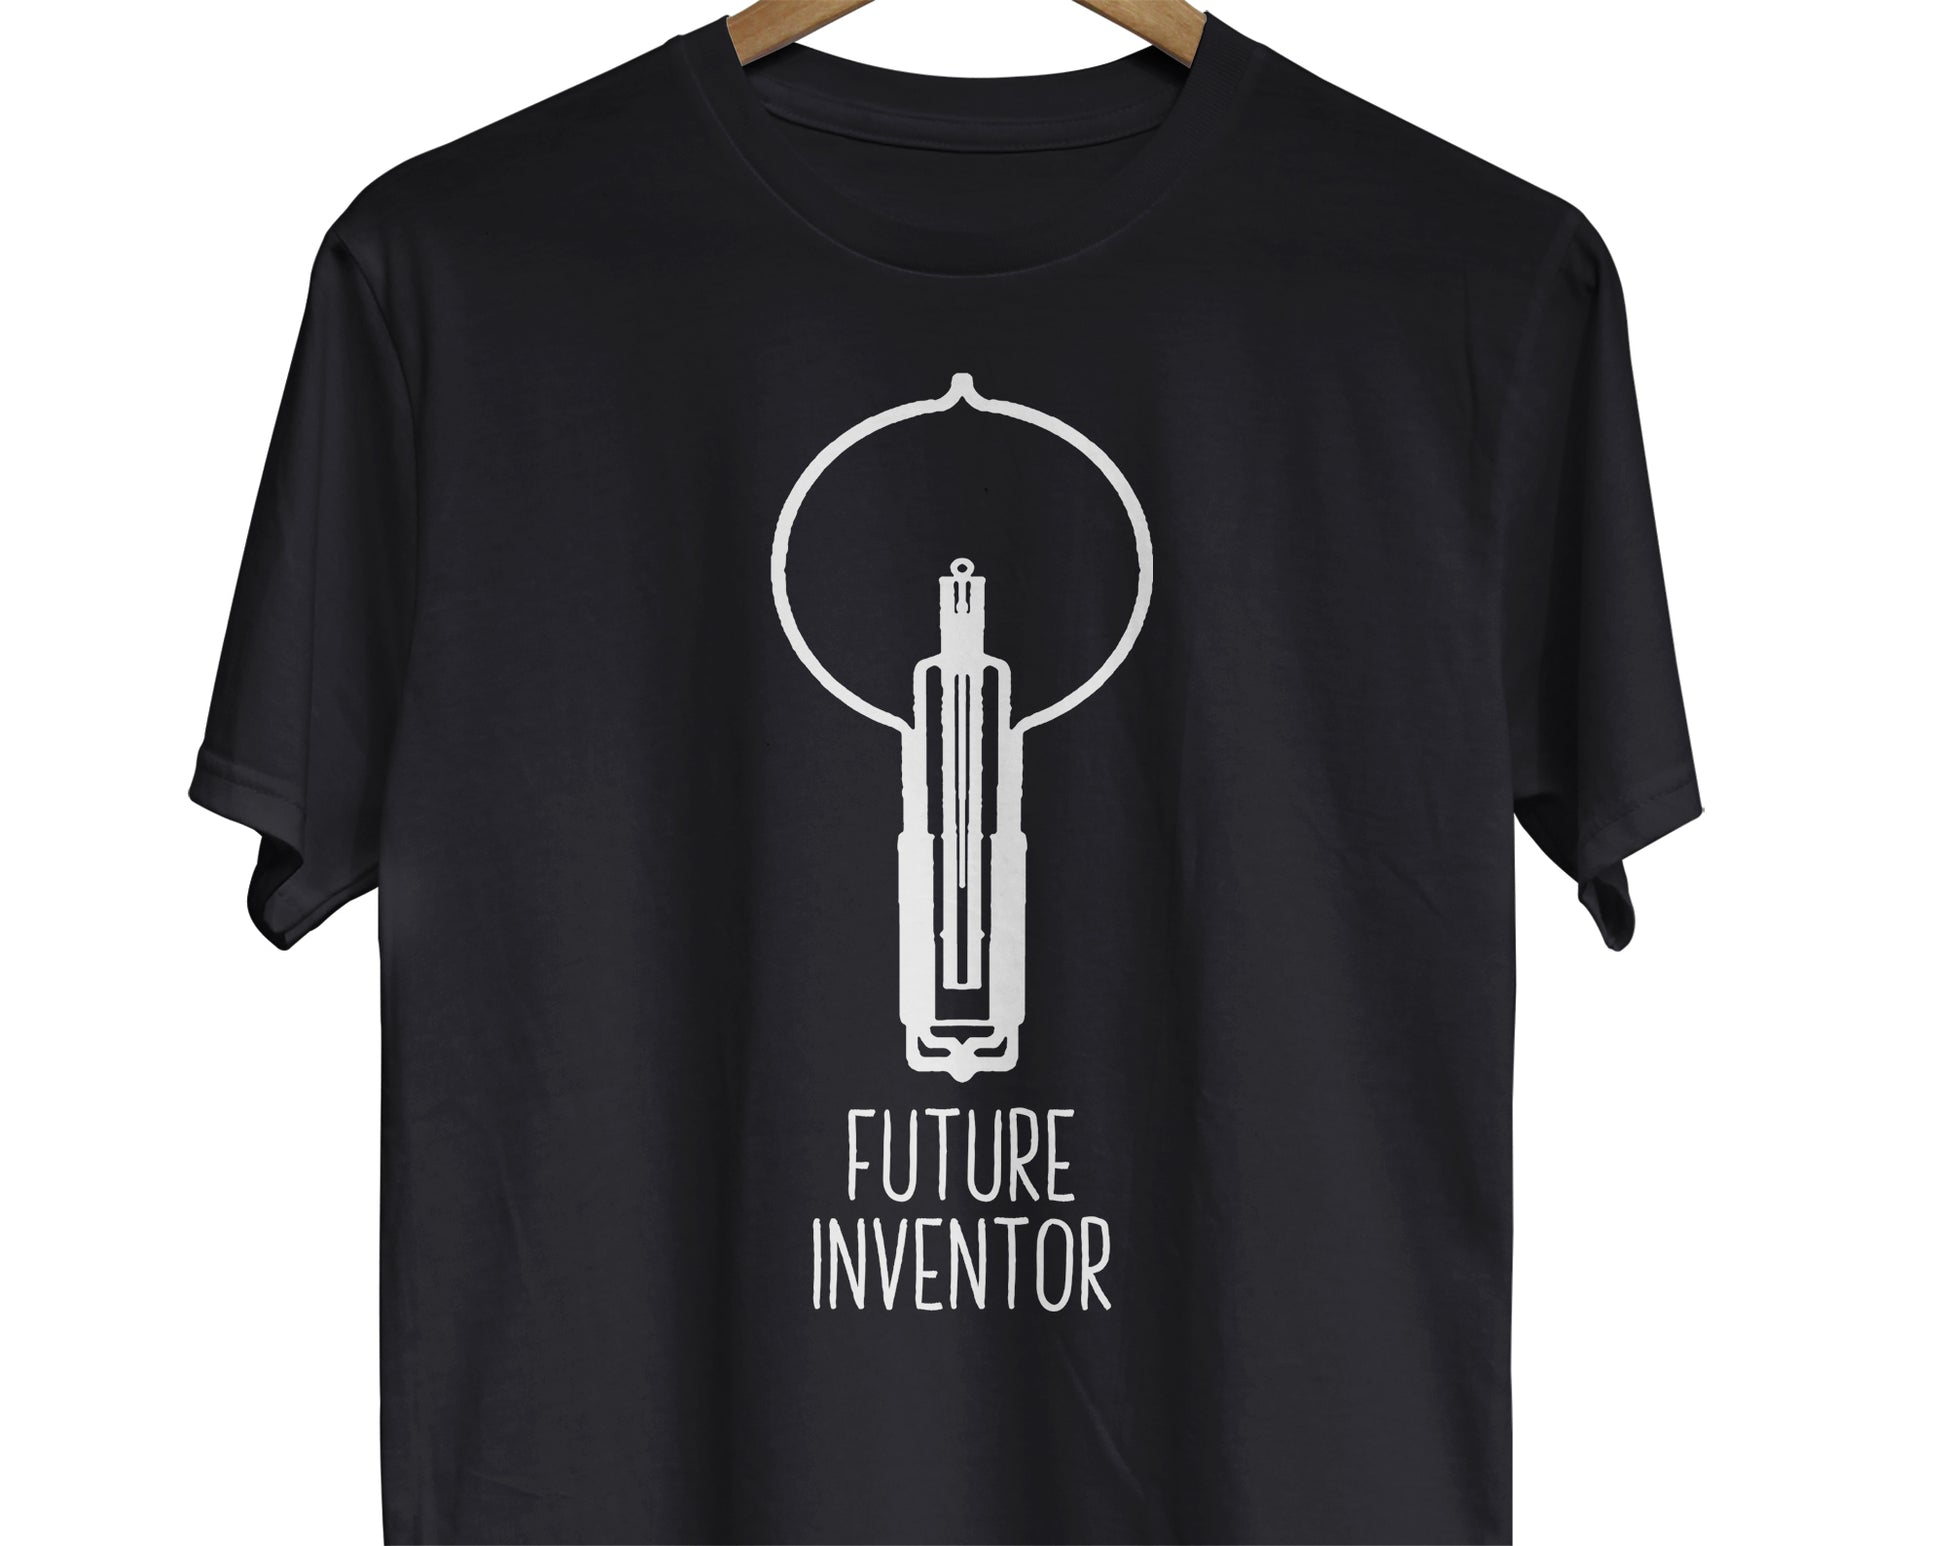 An inspirational t-shirt featuring a lightbulb image and the text "Future Inventor"